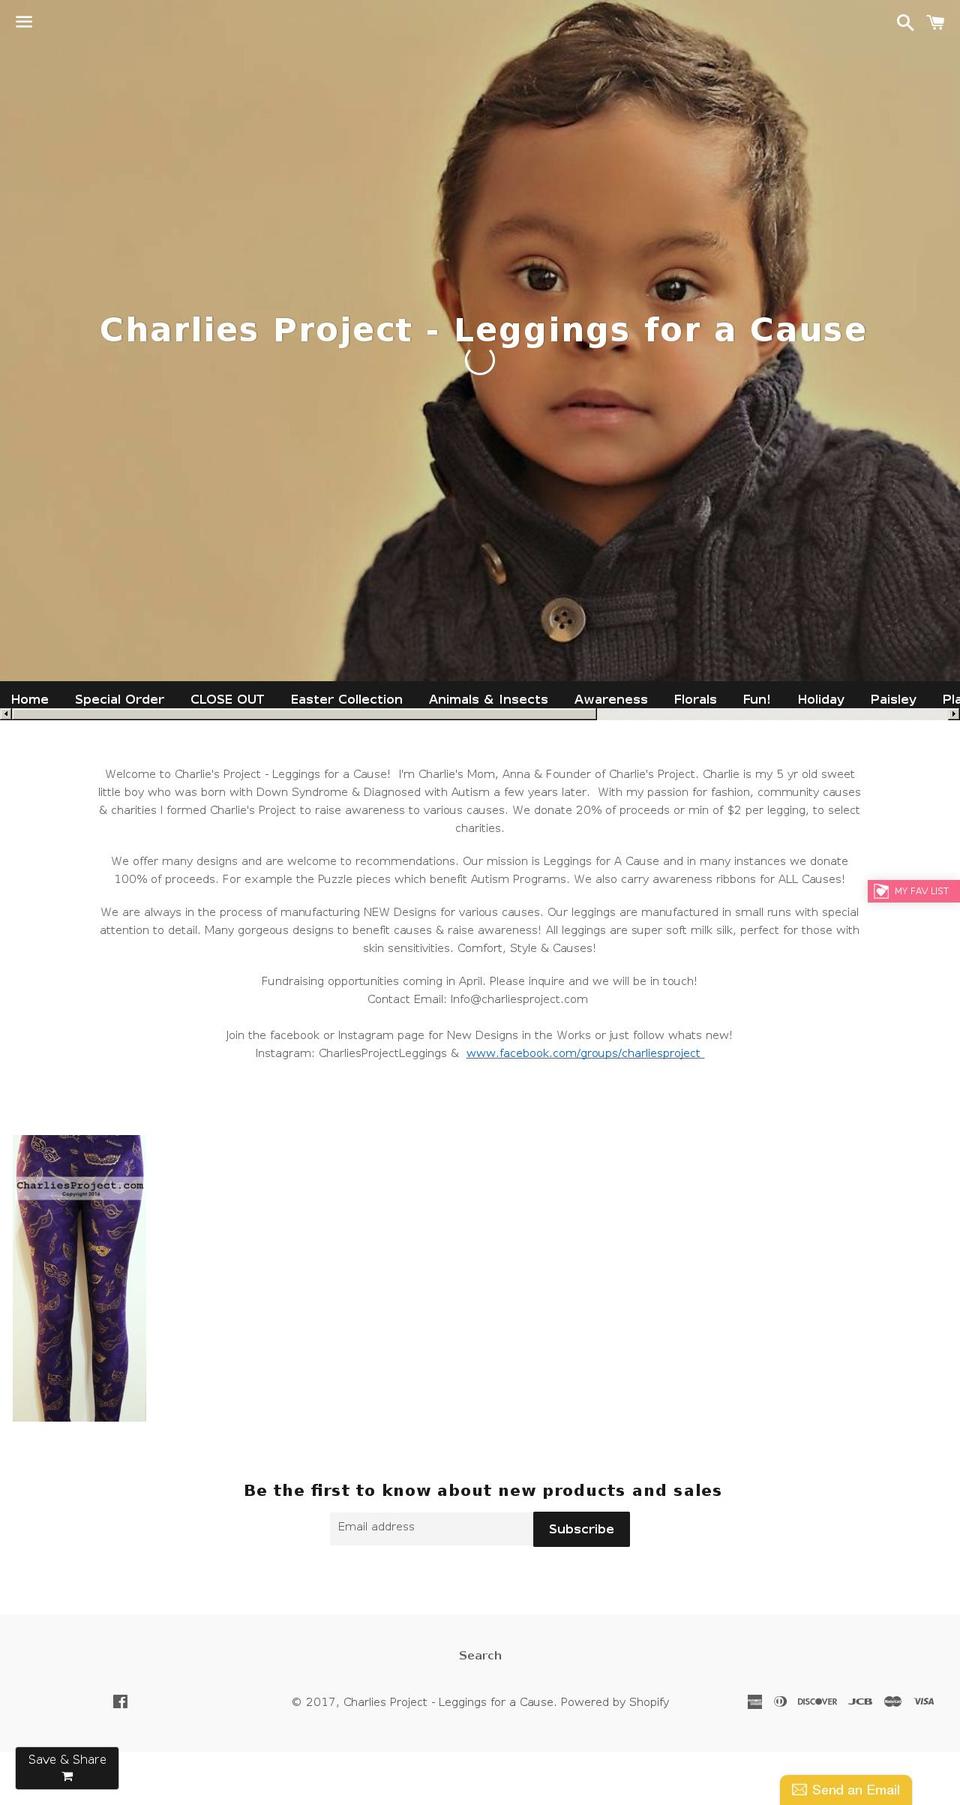 Symmetry Shopify theme site example charlies-project-leggings-for-a-cause.myshopify.com